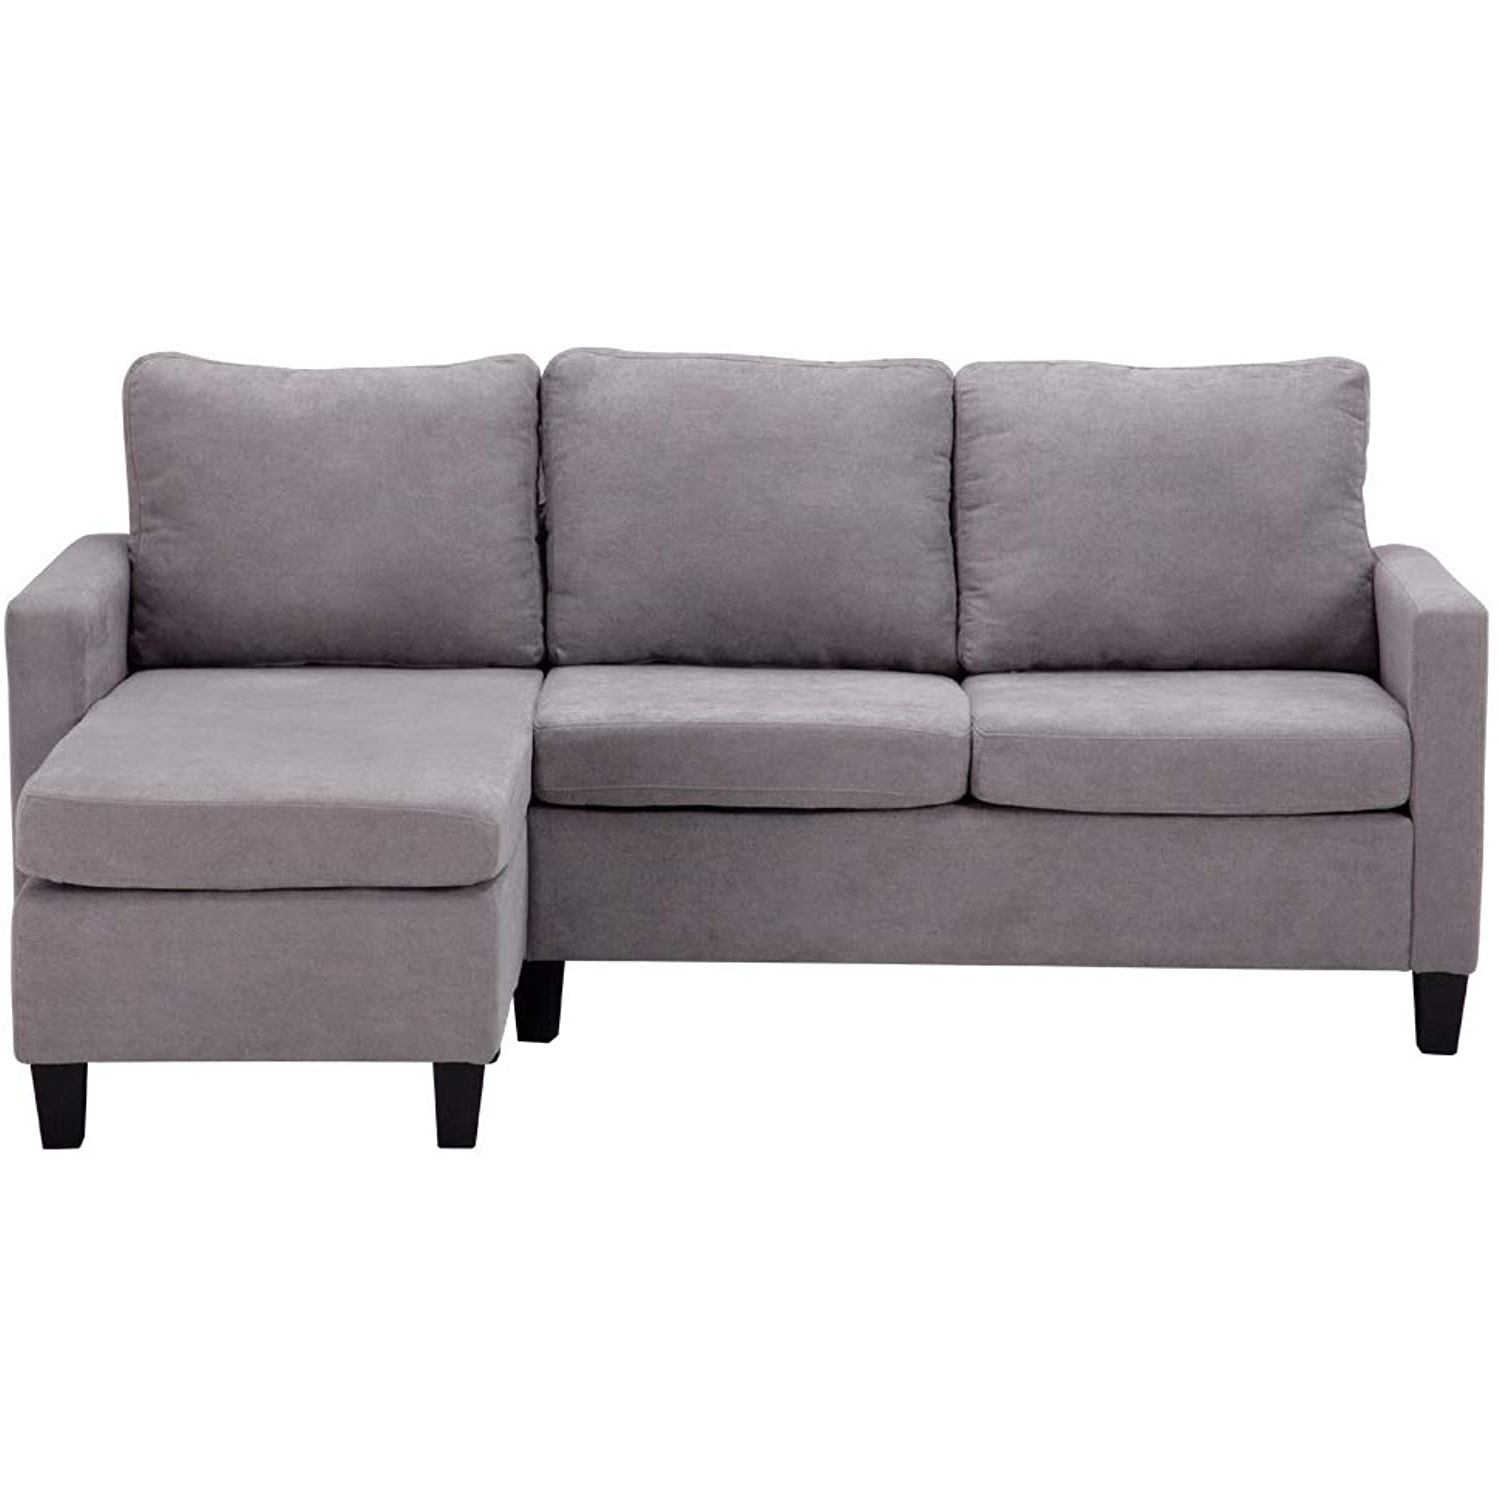 Trendy Amazon: Hmvlw Sofa Modern Tufted Apartment Sofa Mid For Dulce Mid Century Chaise Sofas Light Gray (View 22 of 25)